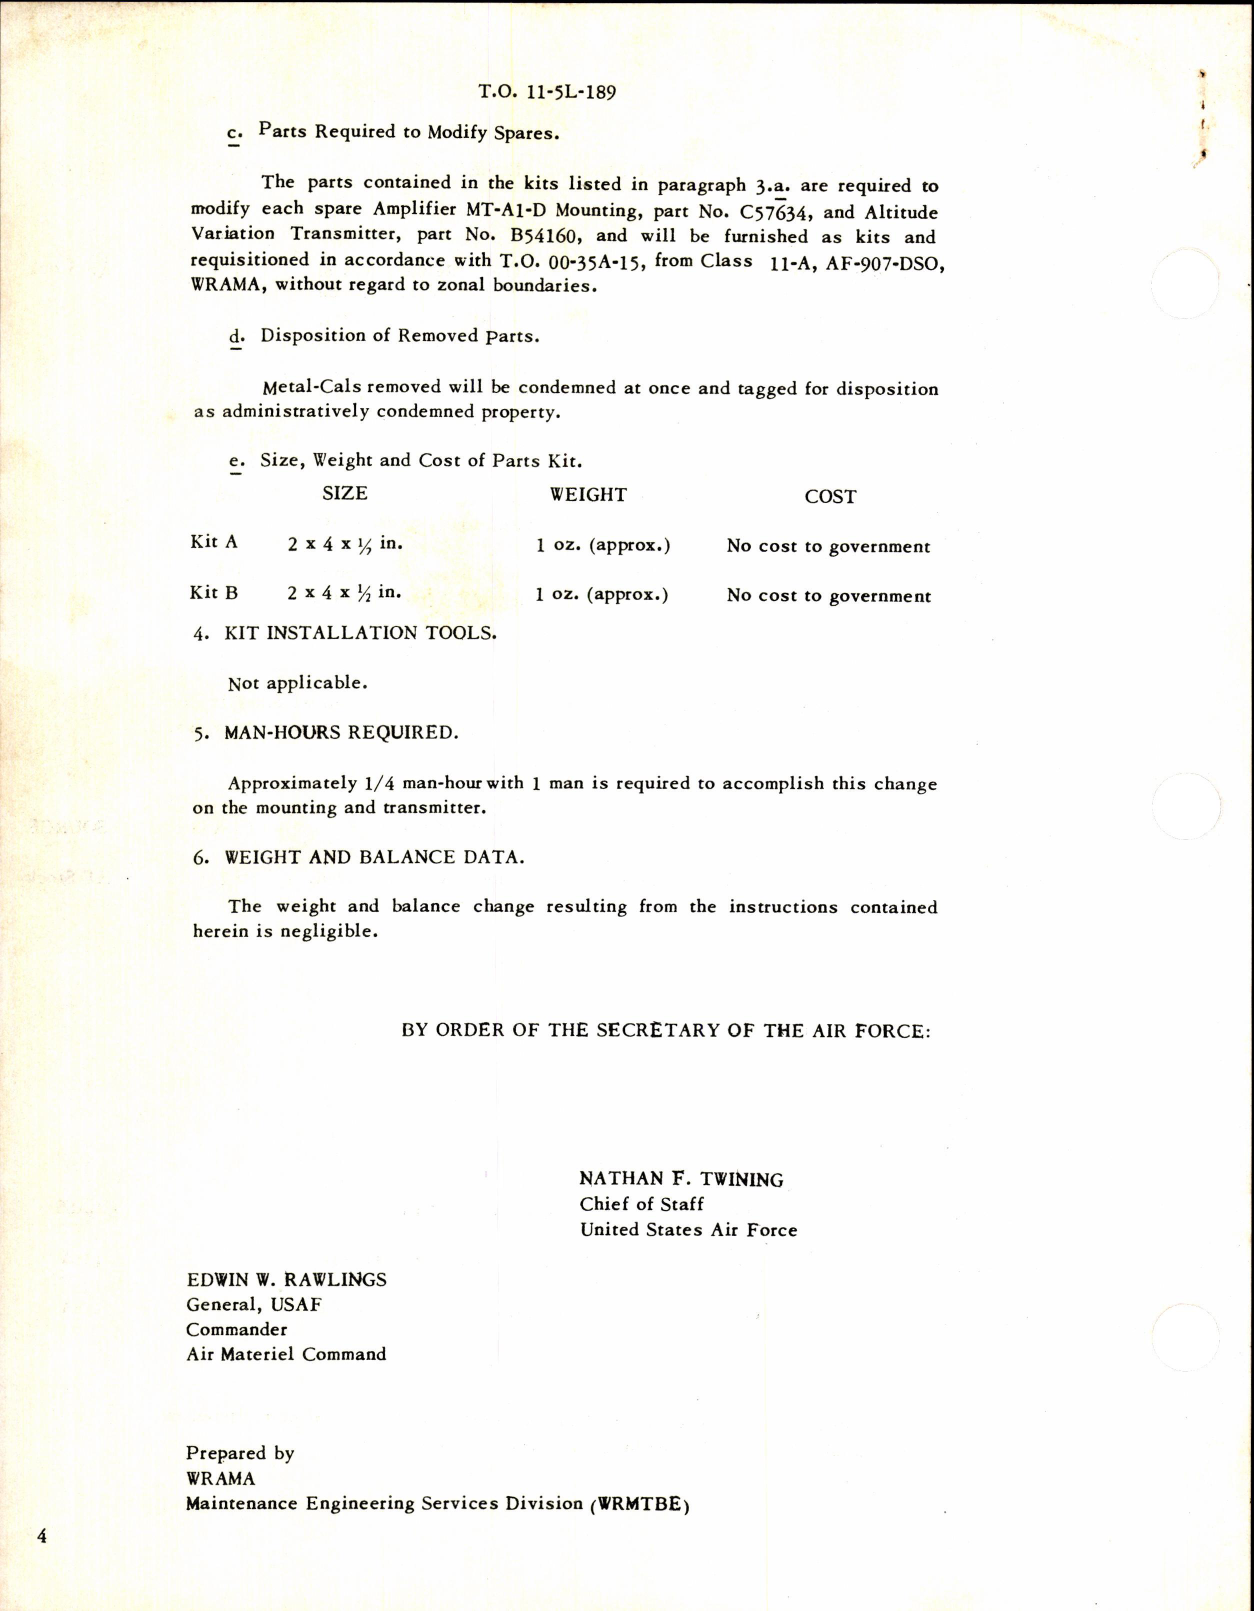 Sample page 4 from AirCorps Library document: Replacement of Name Plate on Altitude Transmitter